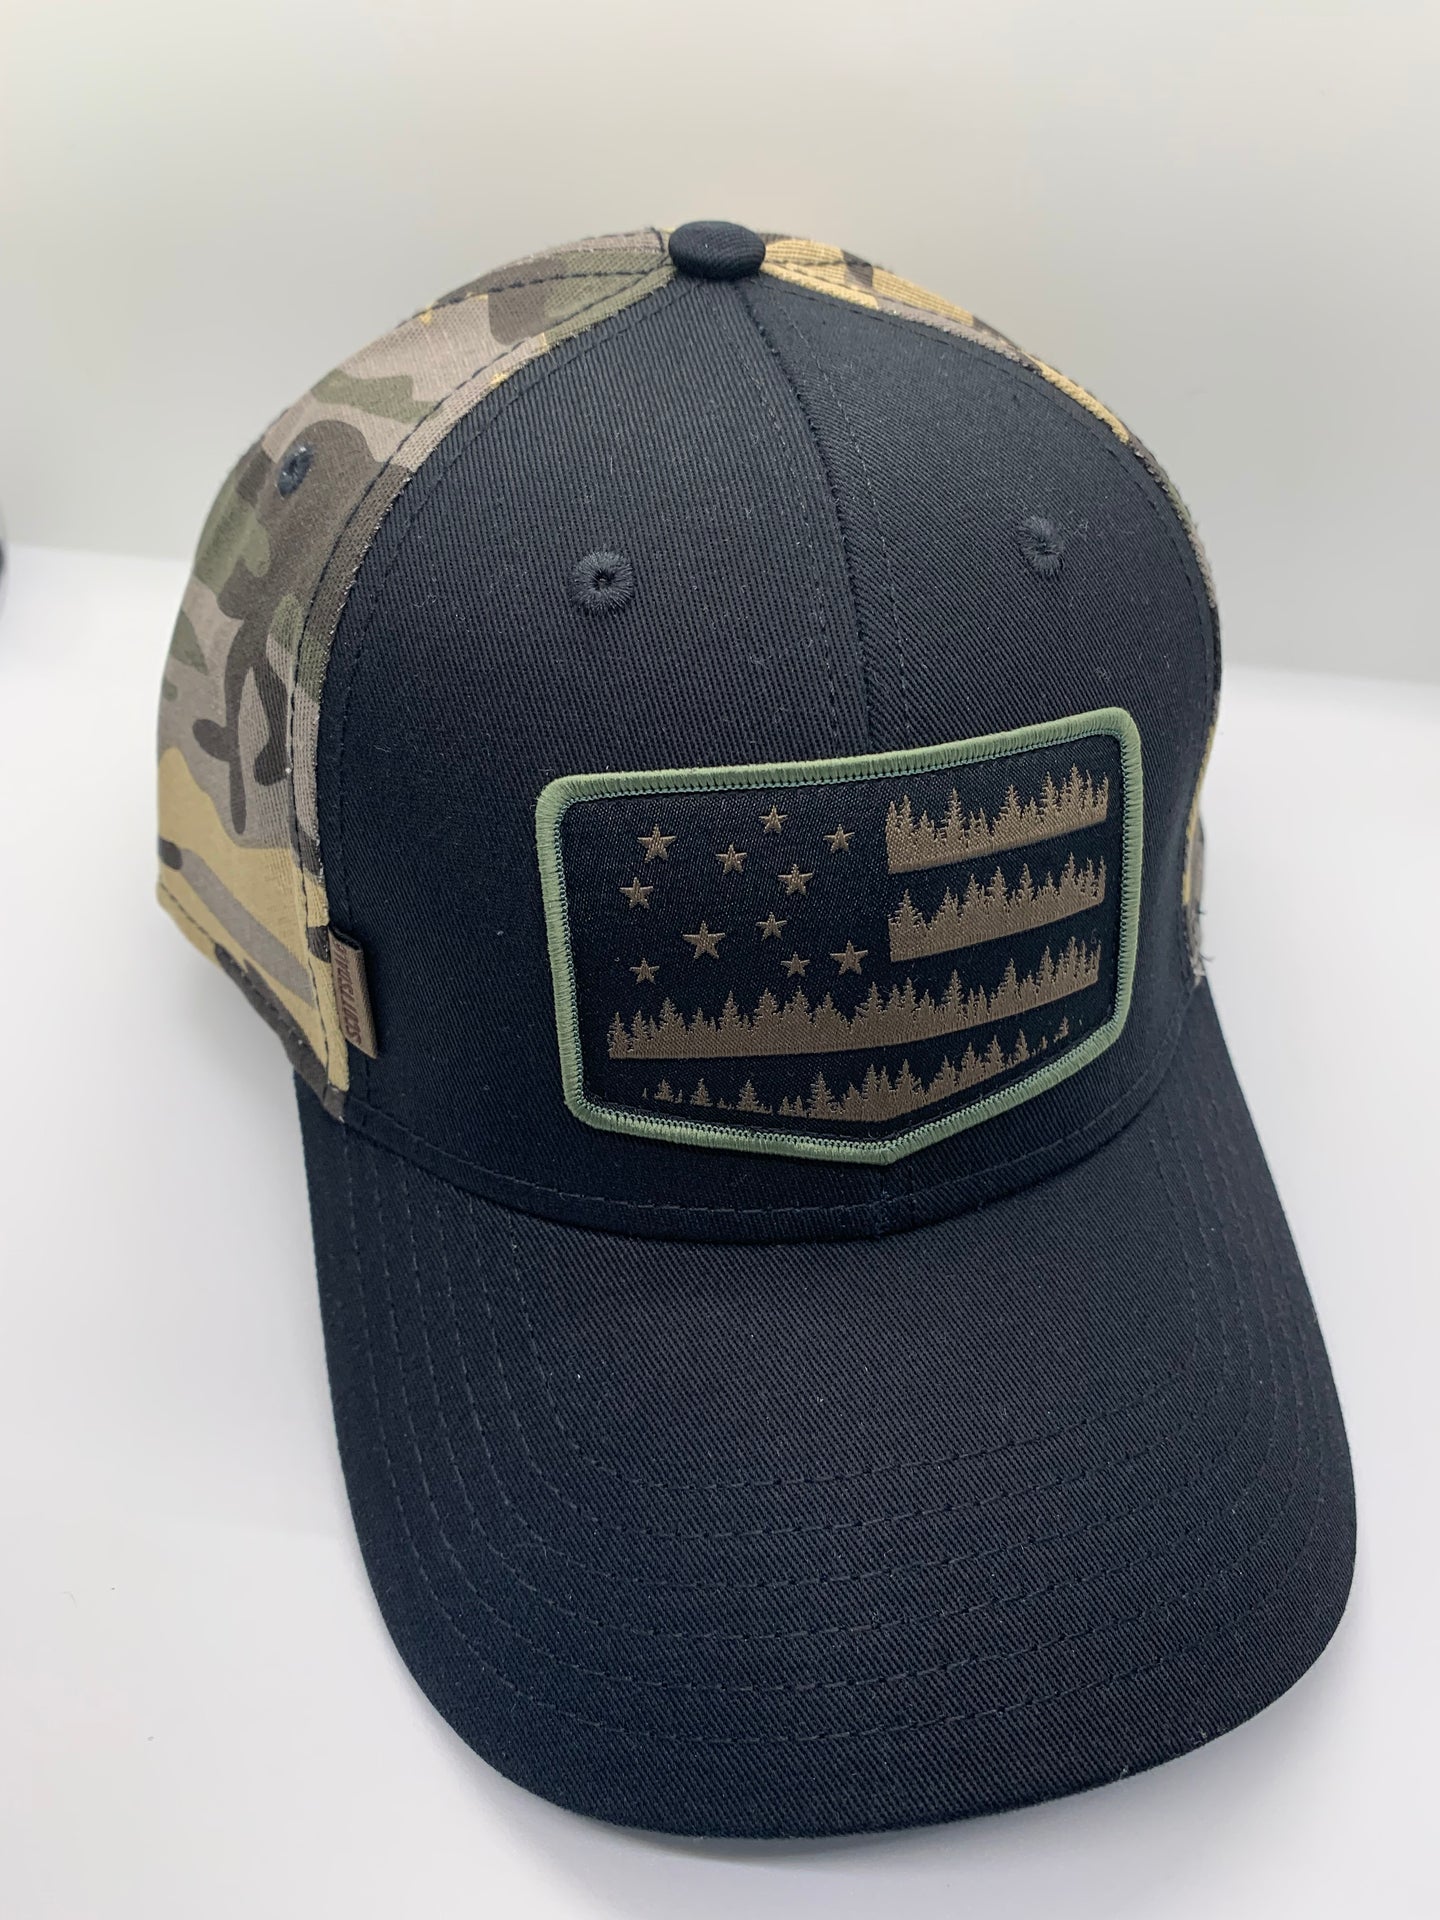 G54 Black and Camo American Flag Hat